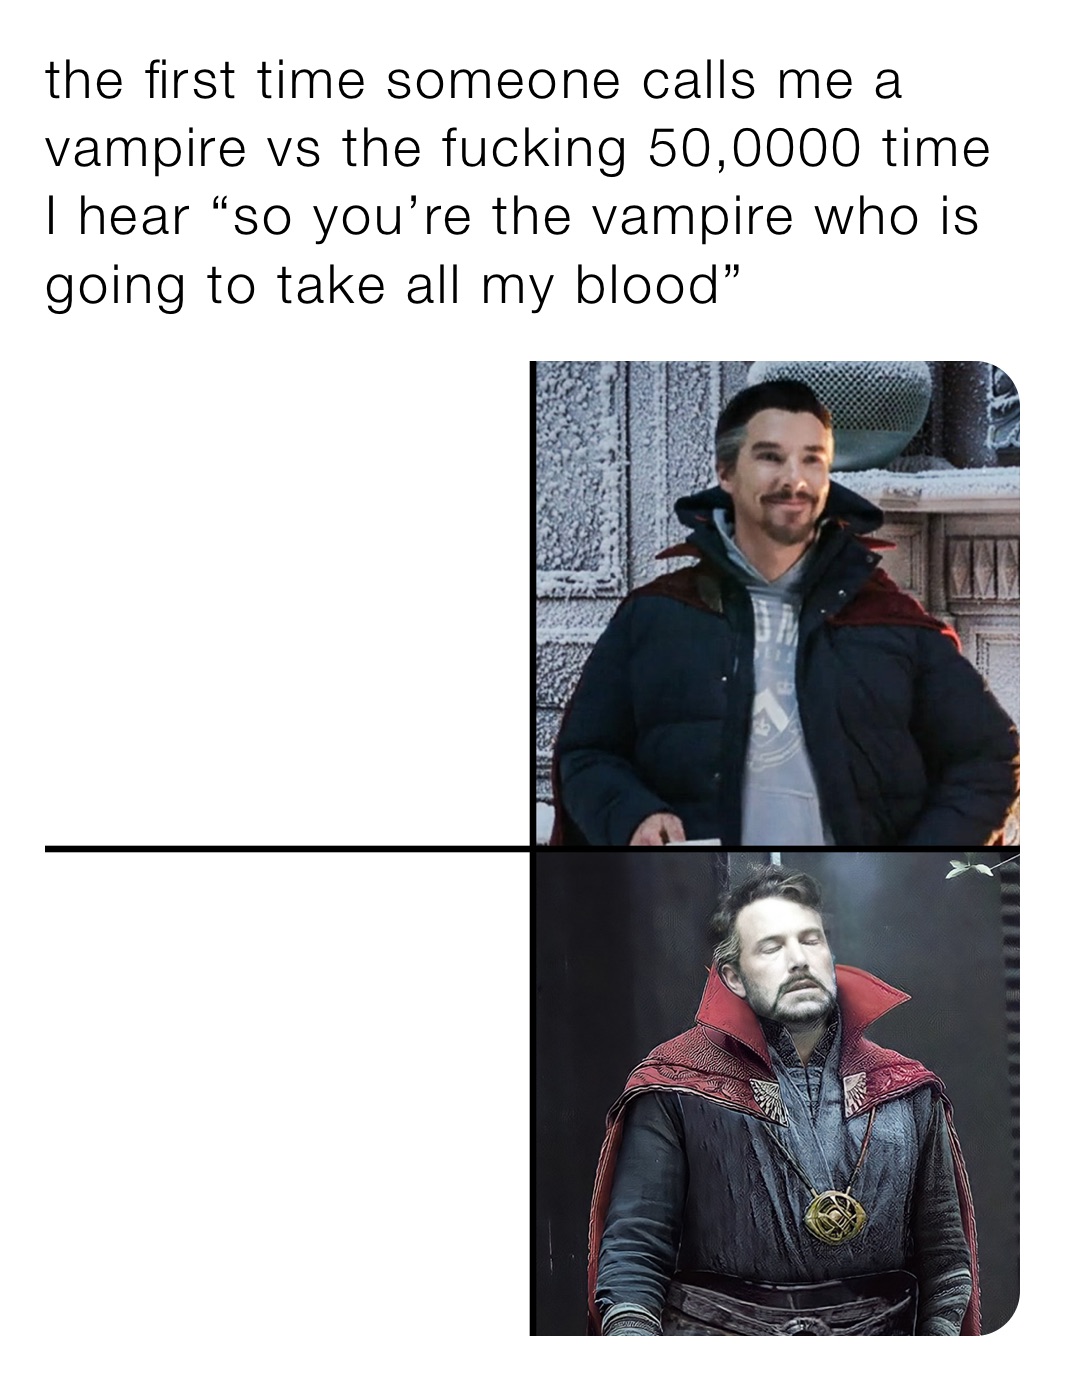 the first time someone calls me a vampire vs the fucking 50,0000 time I hear “so you’re the vampire who is going to take all my blood”